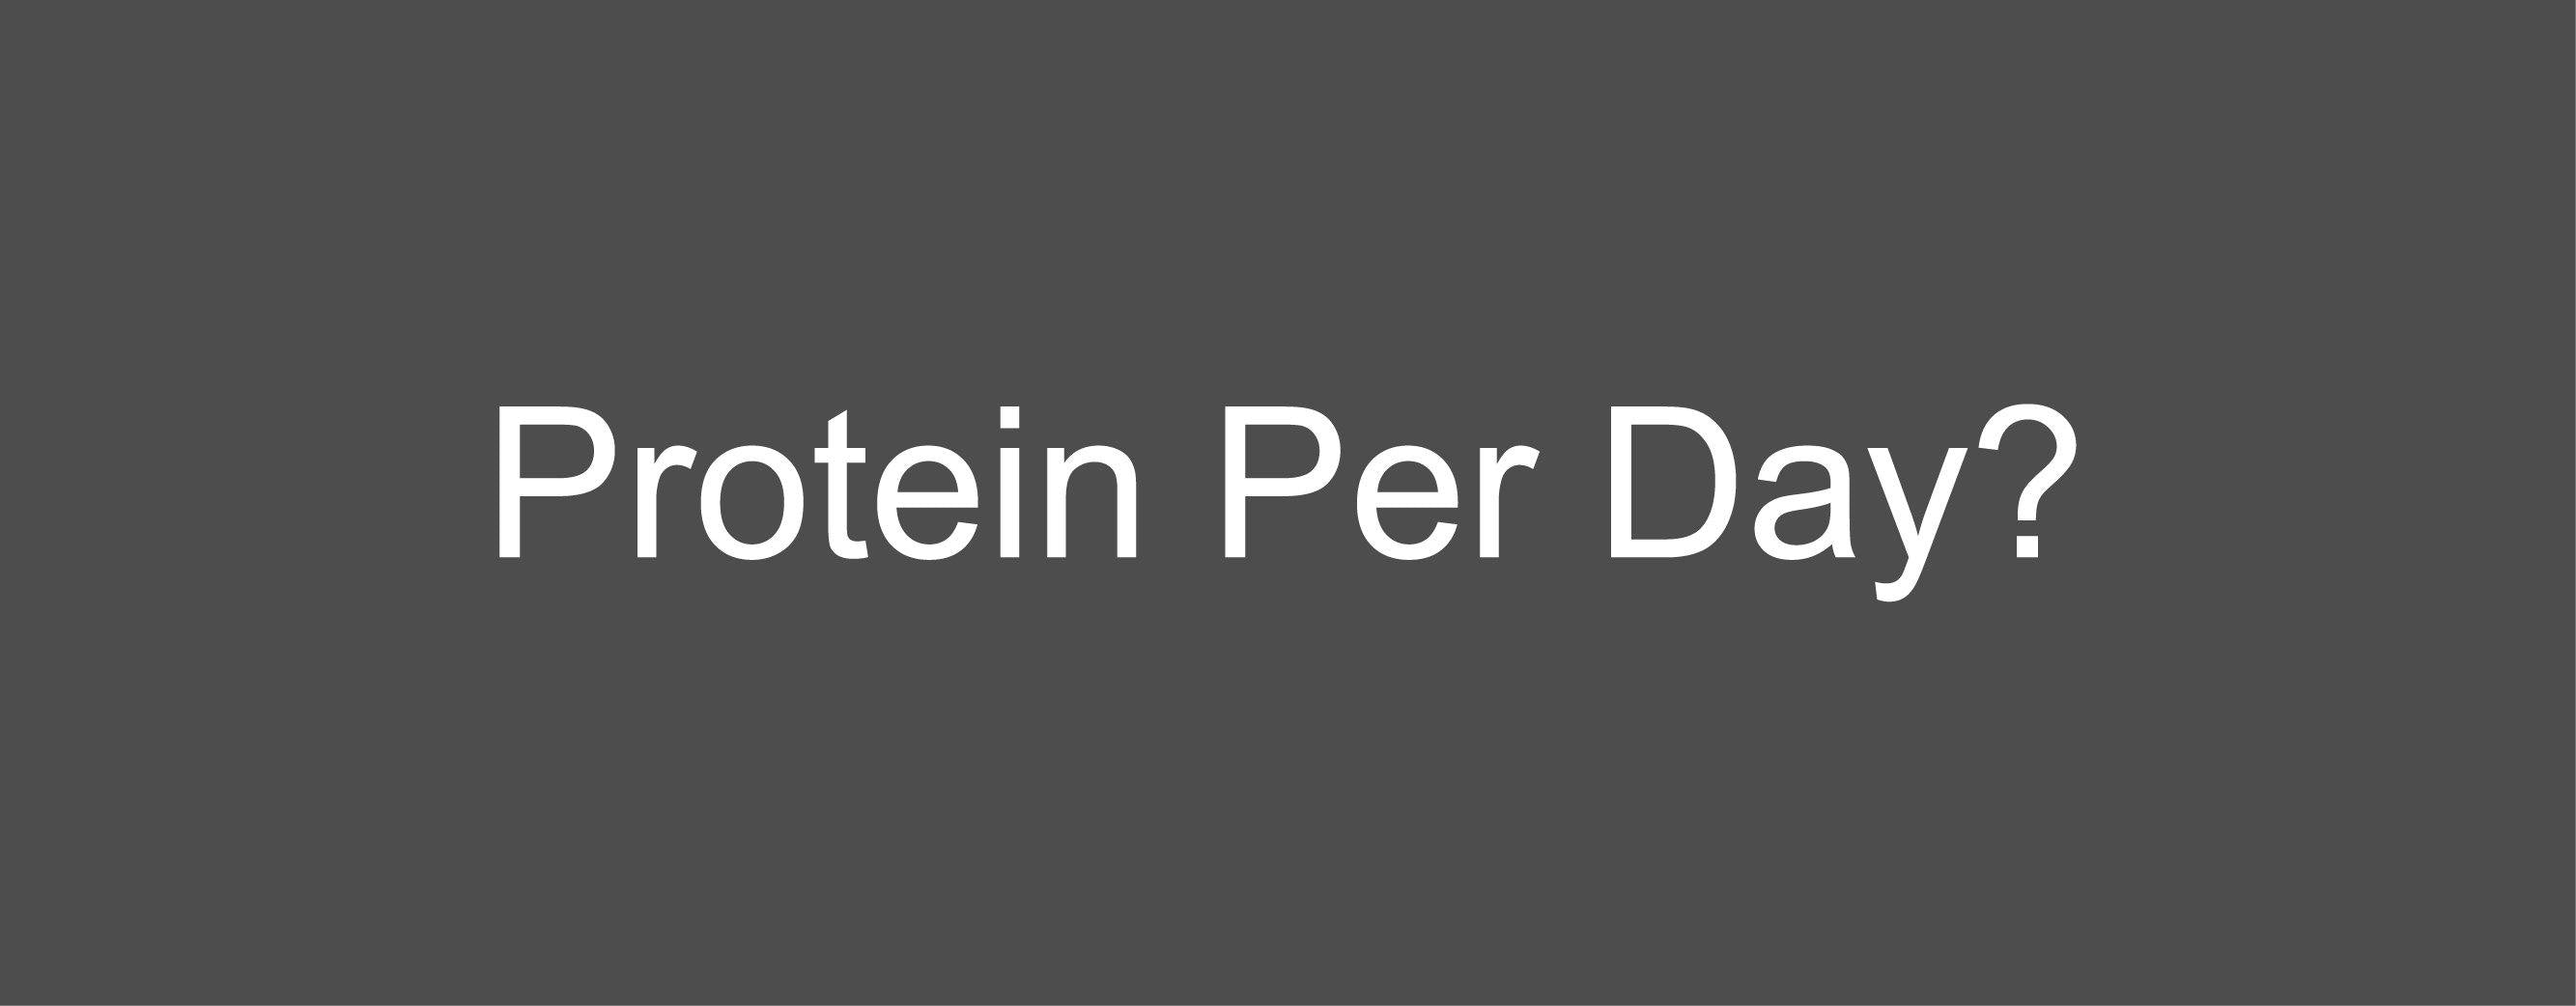 How Many Grams of Protein Per Day Do You Need? - Muscle Nectar